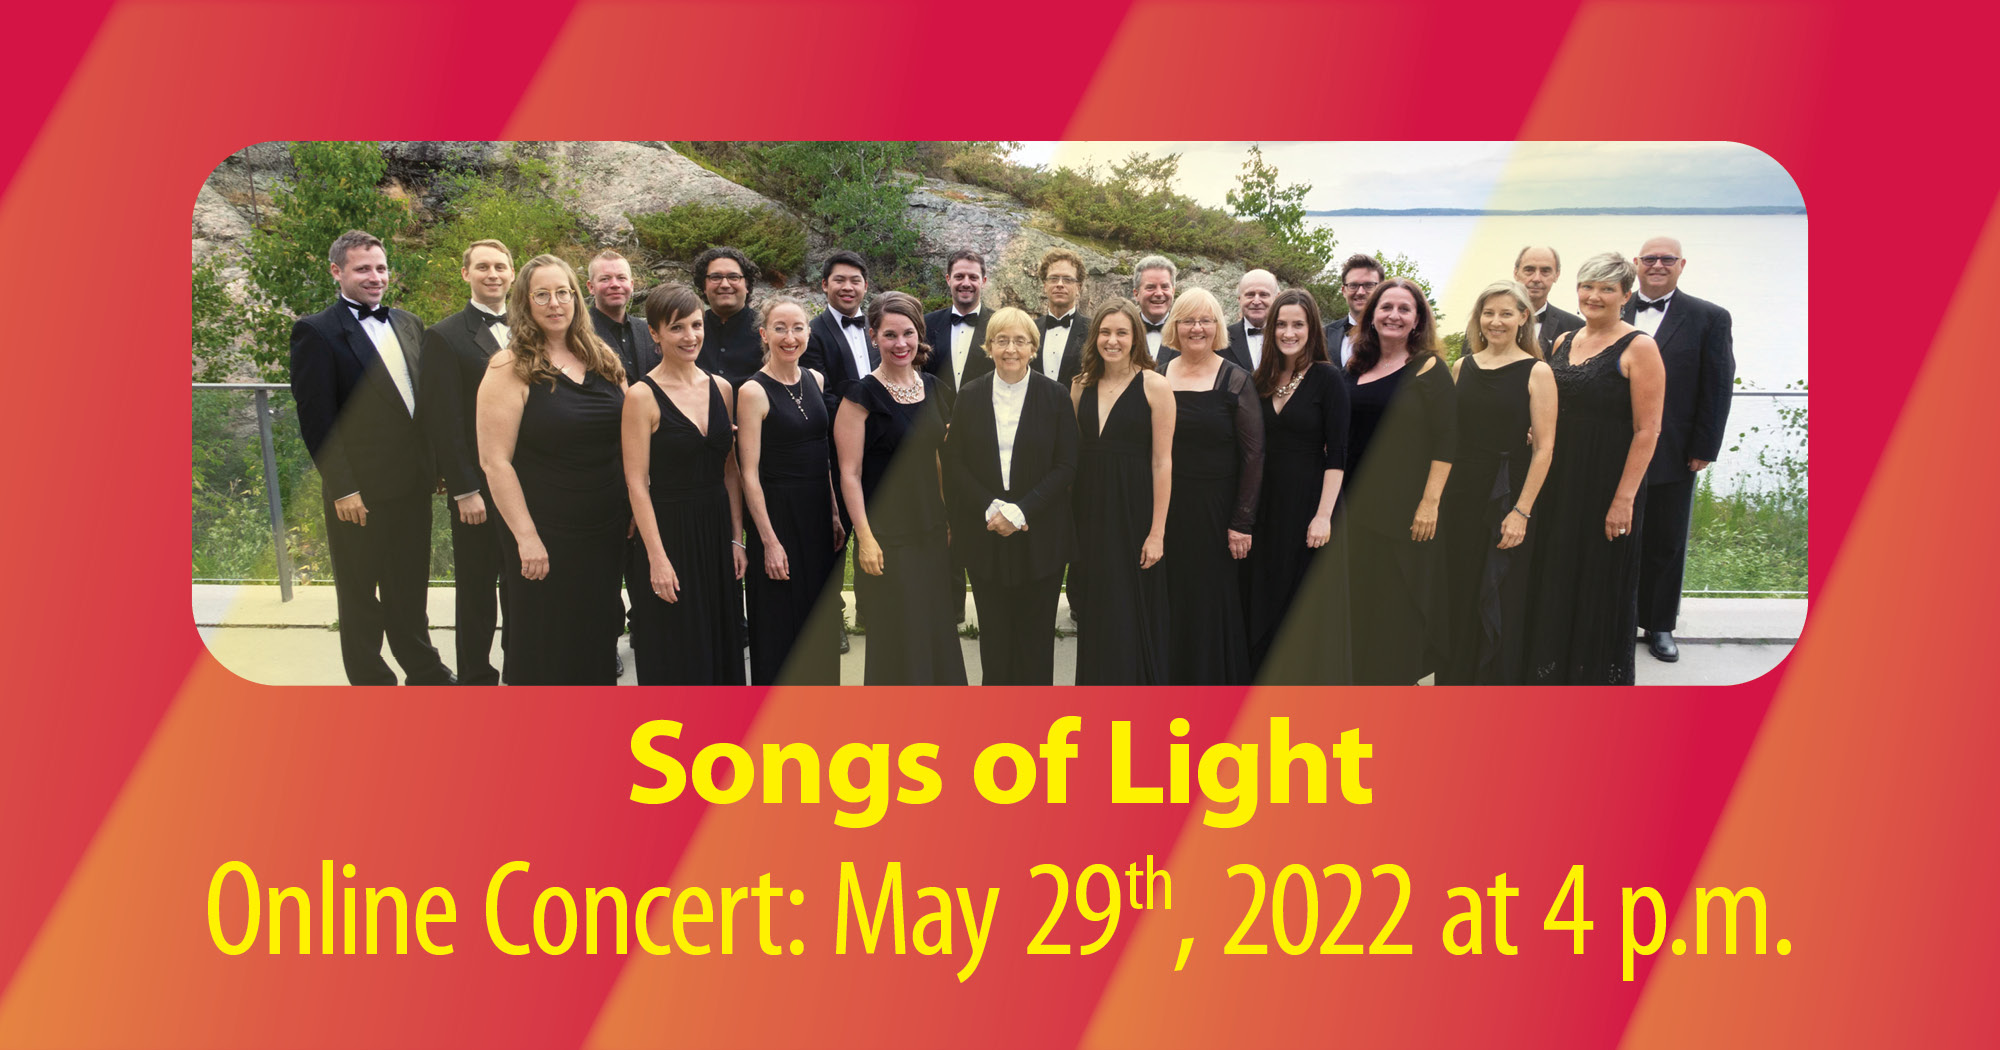 Songs of Light, concert May 29, 2022